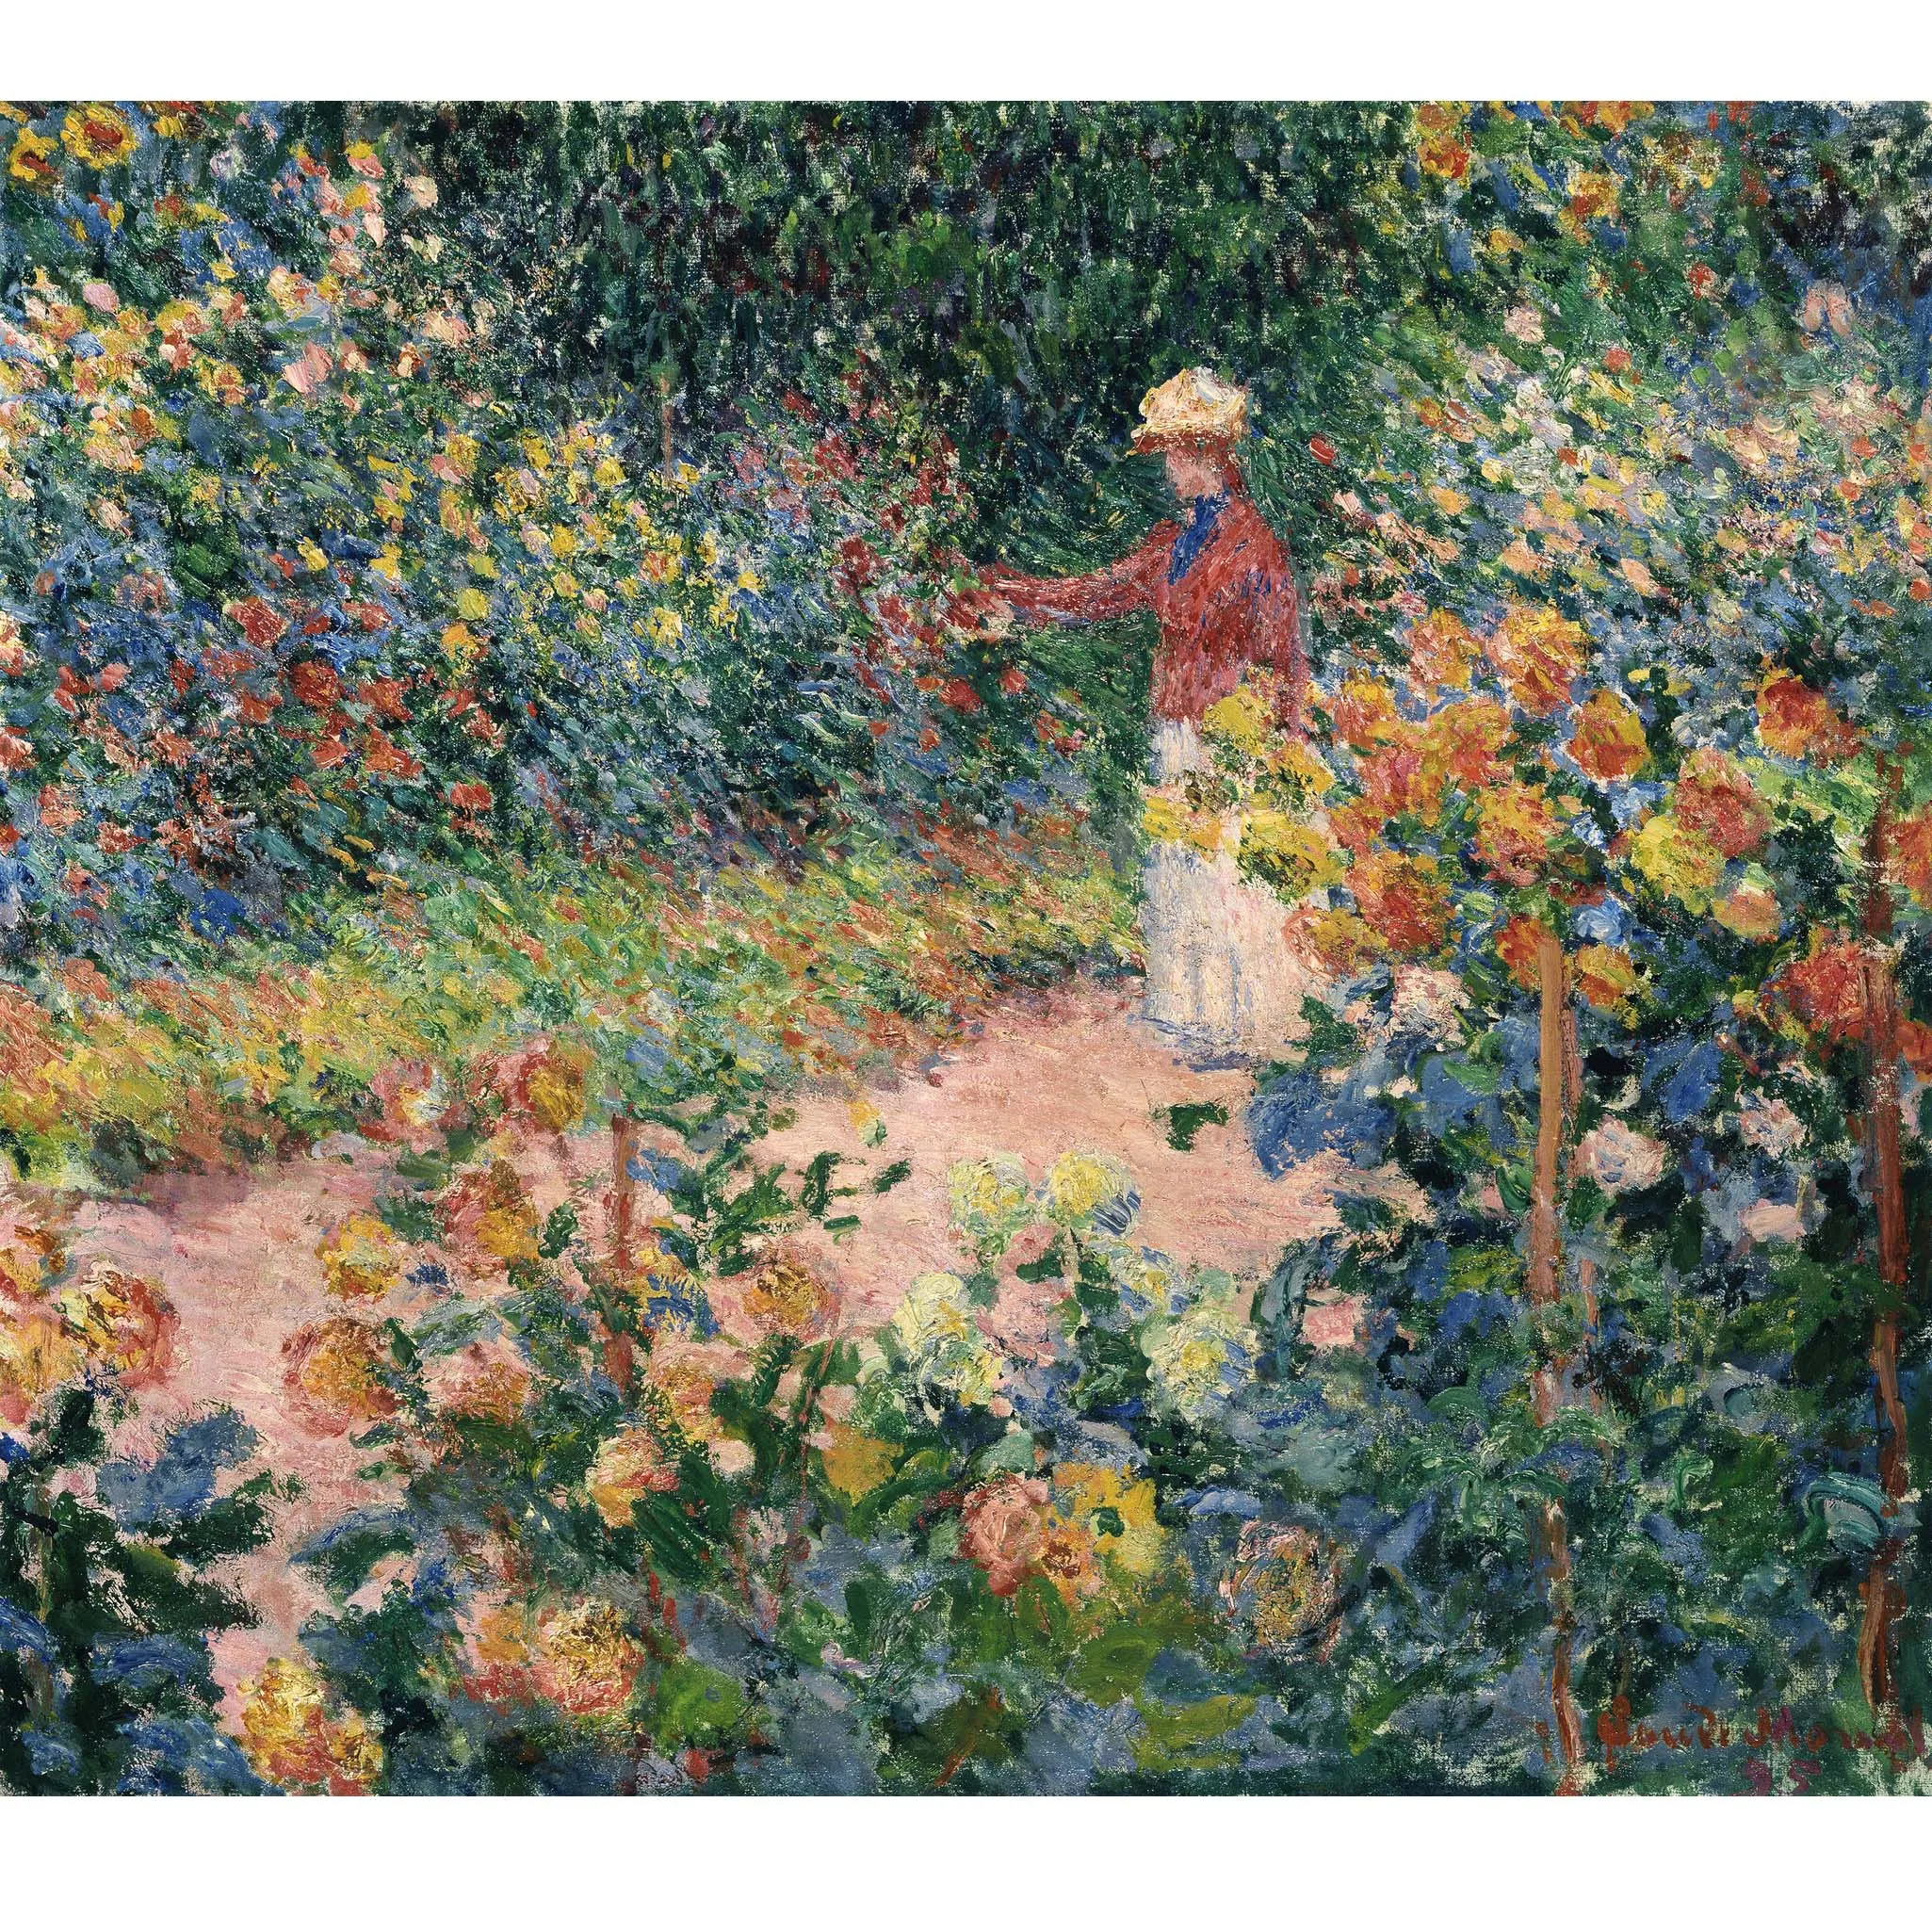 

Monet's Garden at Giverny,Handmade landscape oil painting,Claude Monet painting reproduction,Decoration pictures room wall